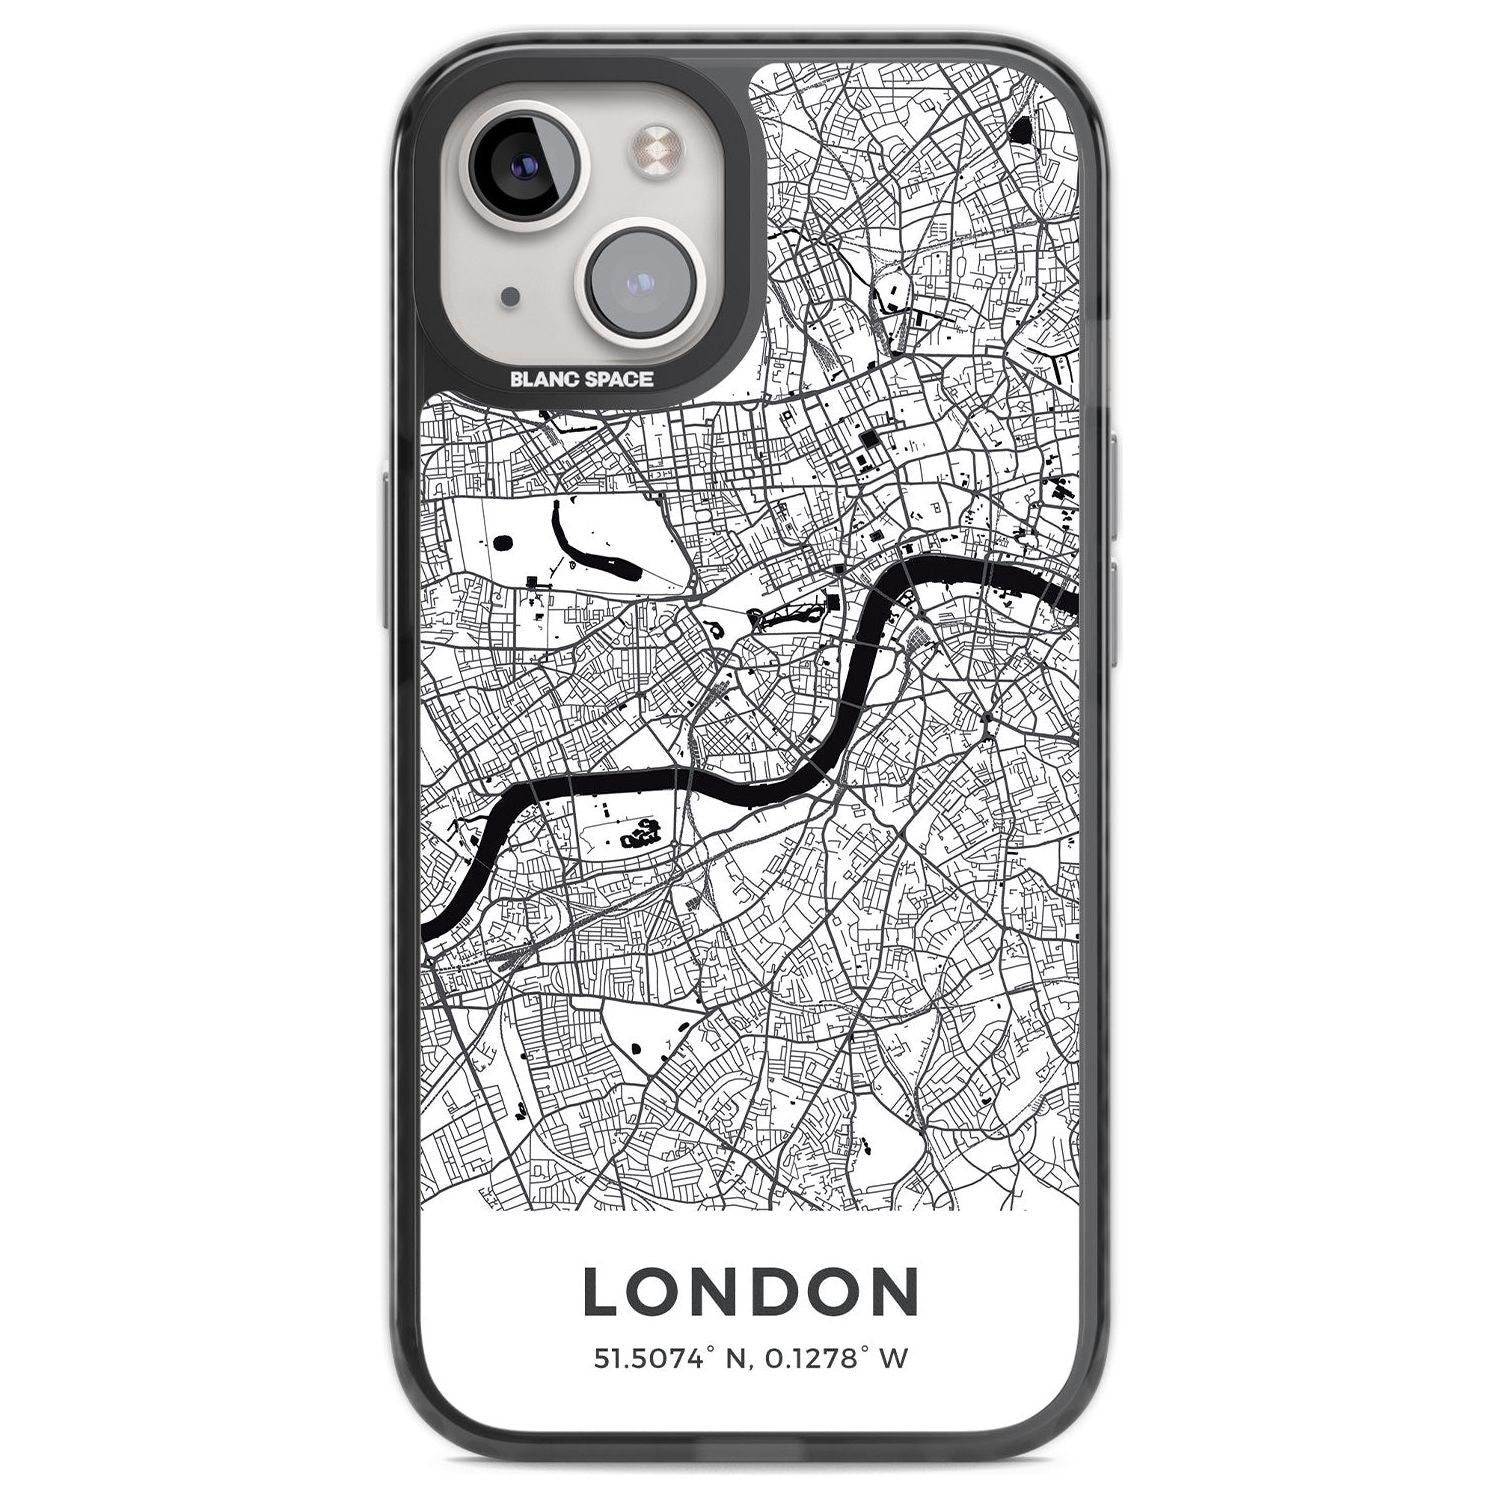 Map of London, England Phone Case iPhone 12 / Black Impact Case,iPhone 13 / Black Impact Case,iPhone 12 Pro / Black Impact Case,iPhone 14 / Black Impact Case,iPhone 15 Plus / Black Impact Case,iPhone 15 / Black Impact Case Blanc Space